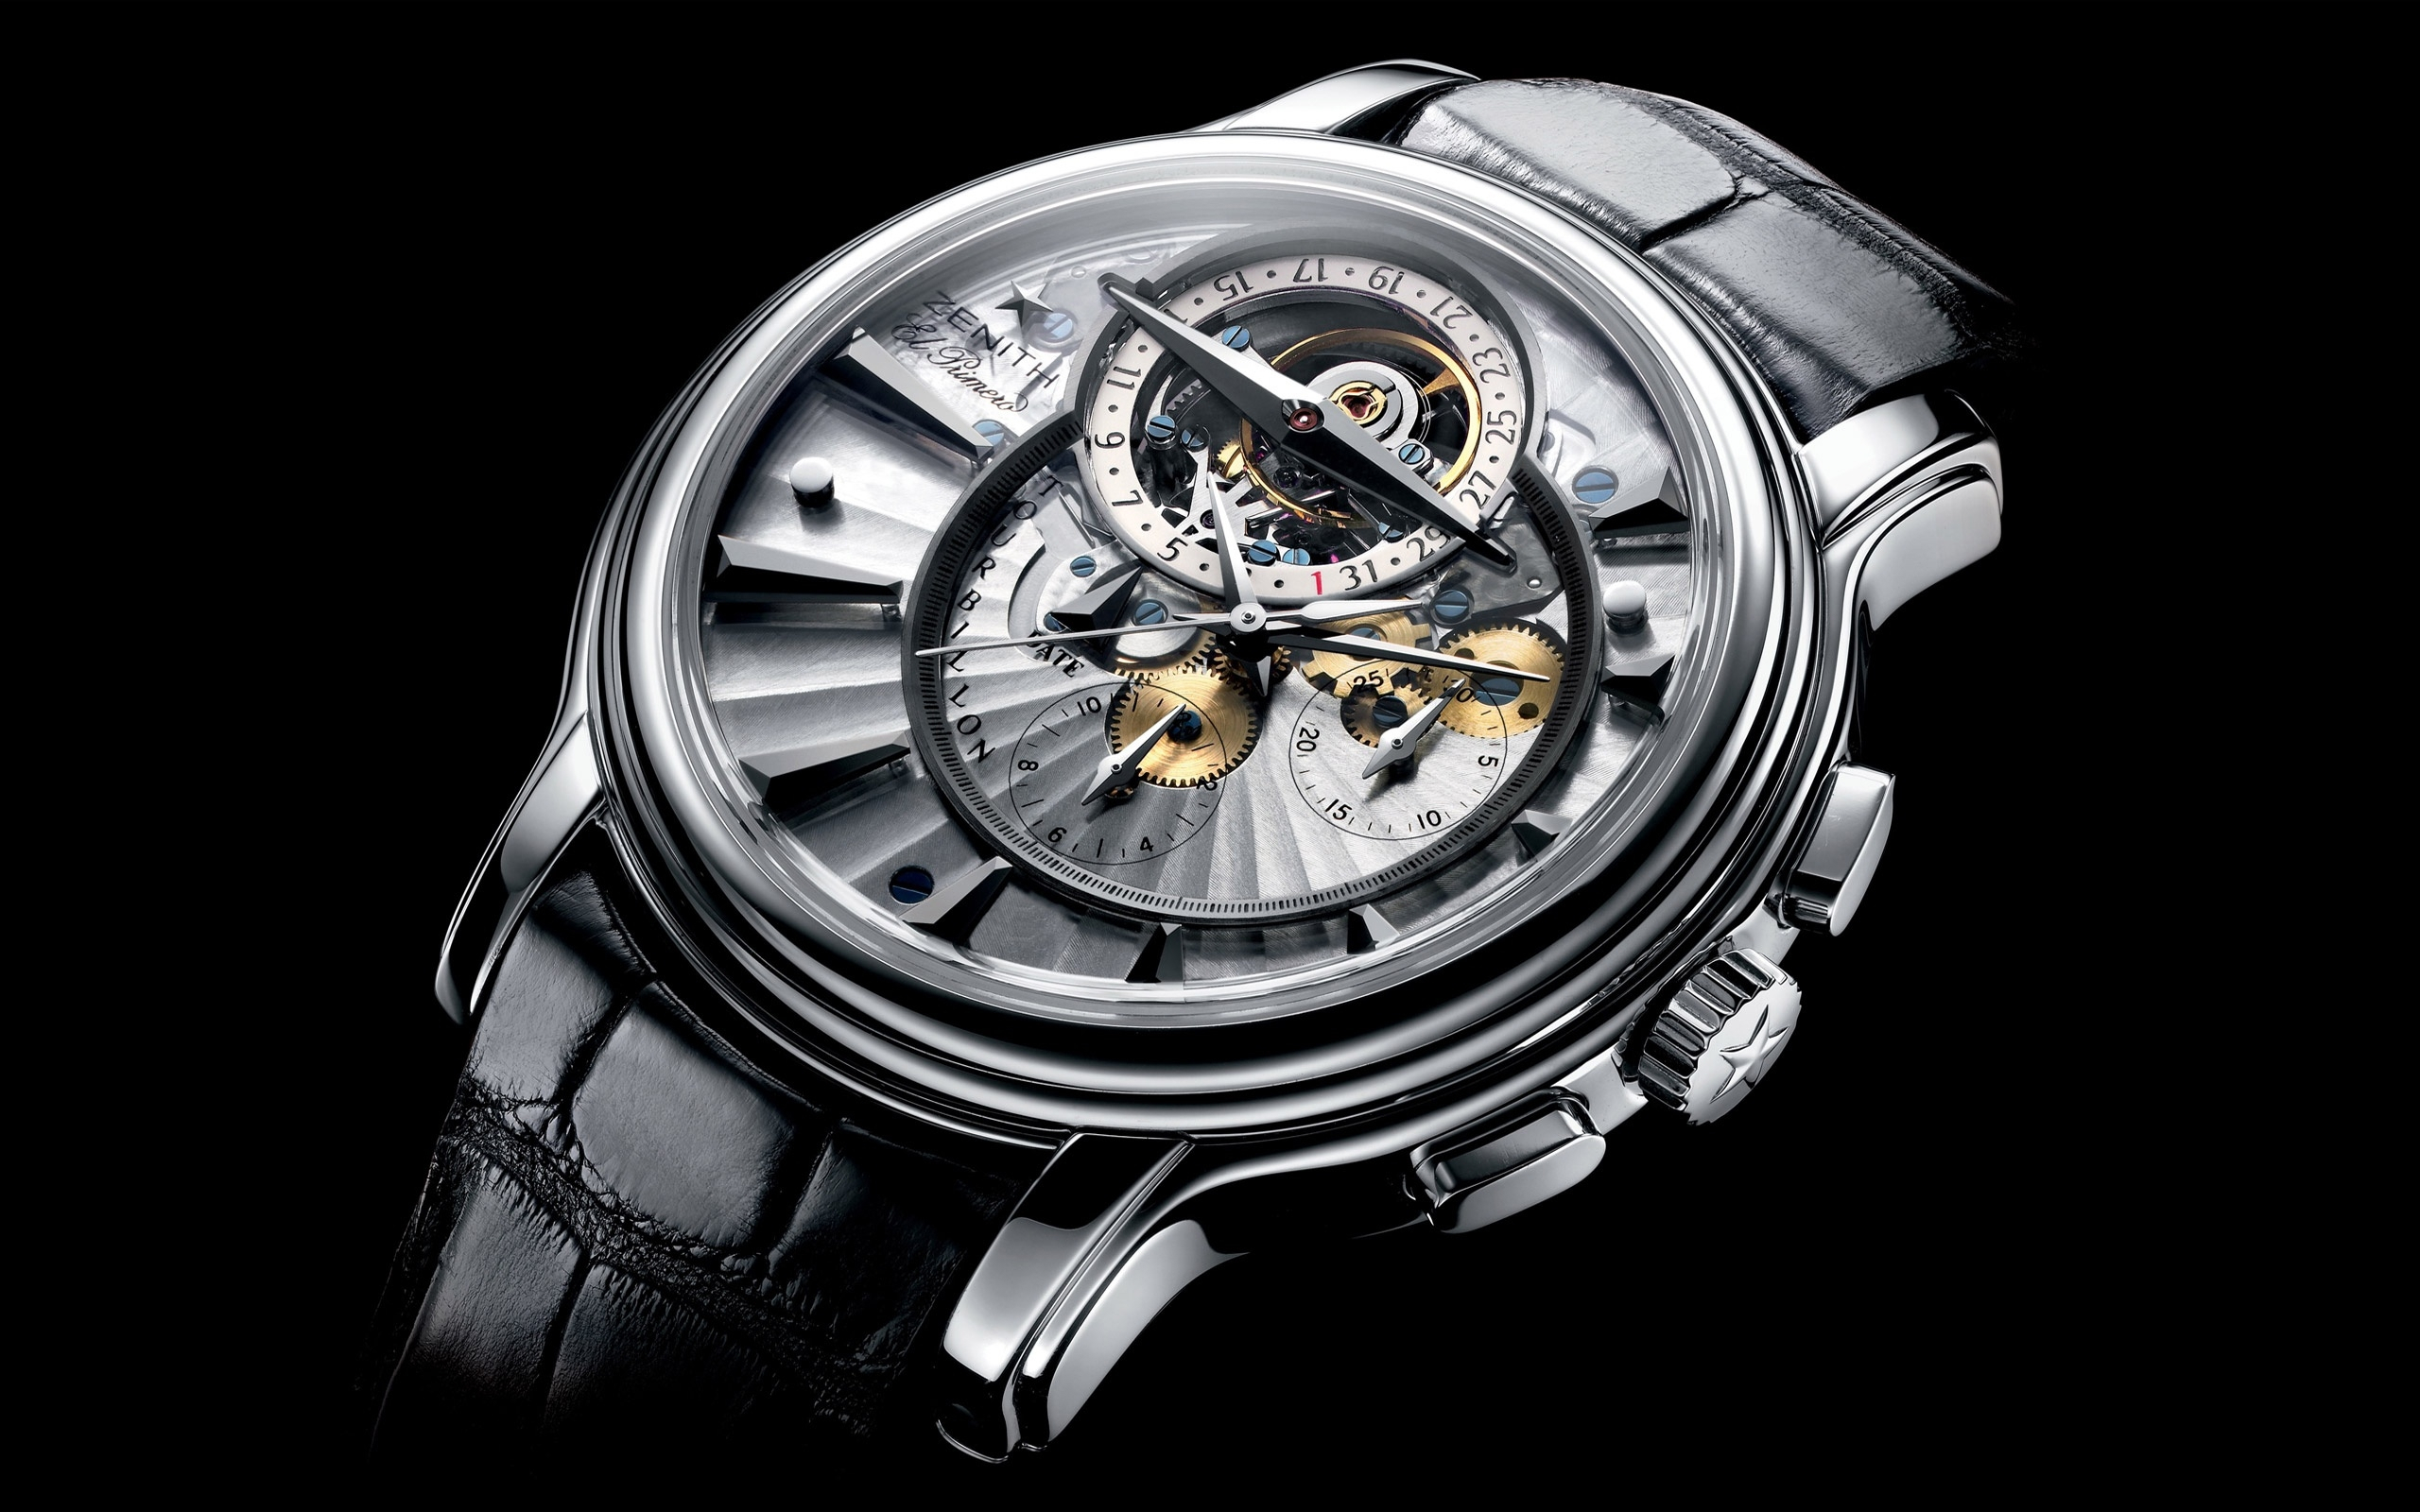 Zenith Watch - Man Made masterpiece for a refined and timeless style